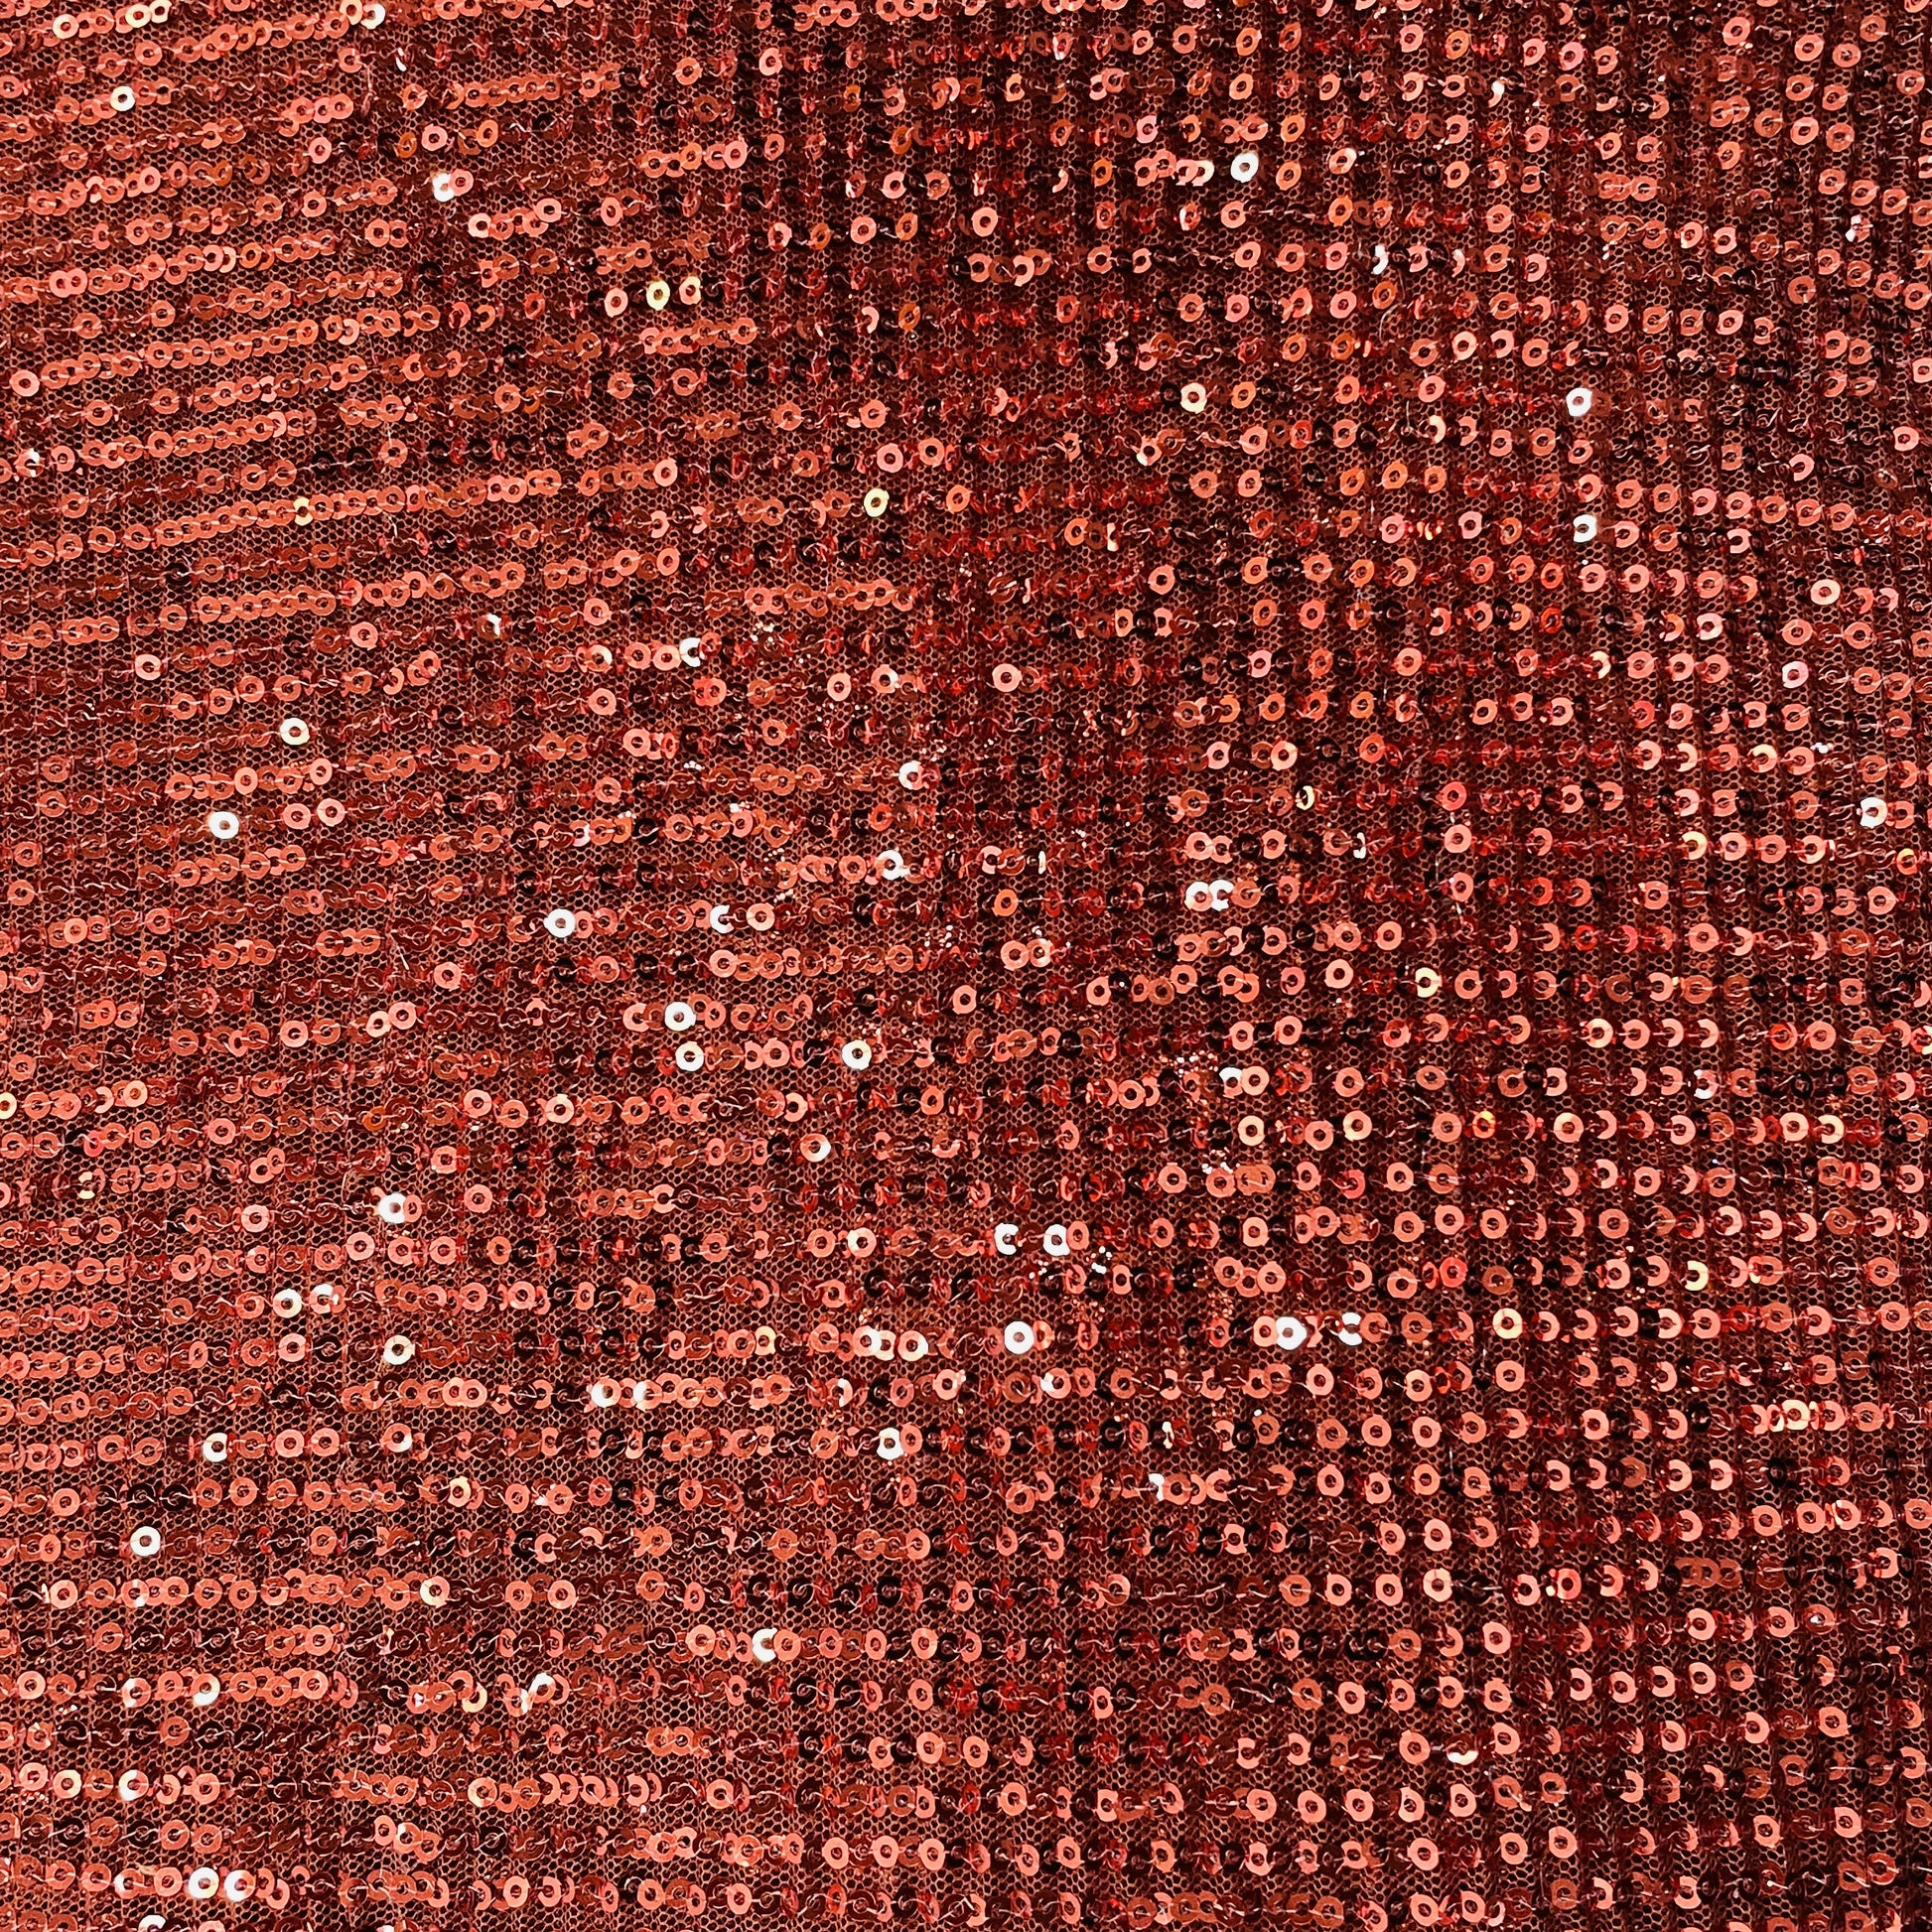 Rust Red Stripe Sequence Crushed Net Imported Fabric - TradeUNO